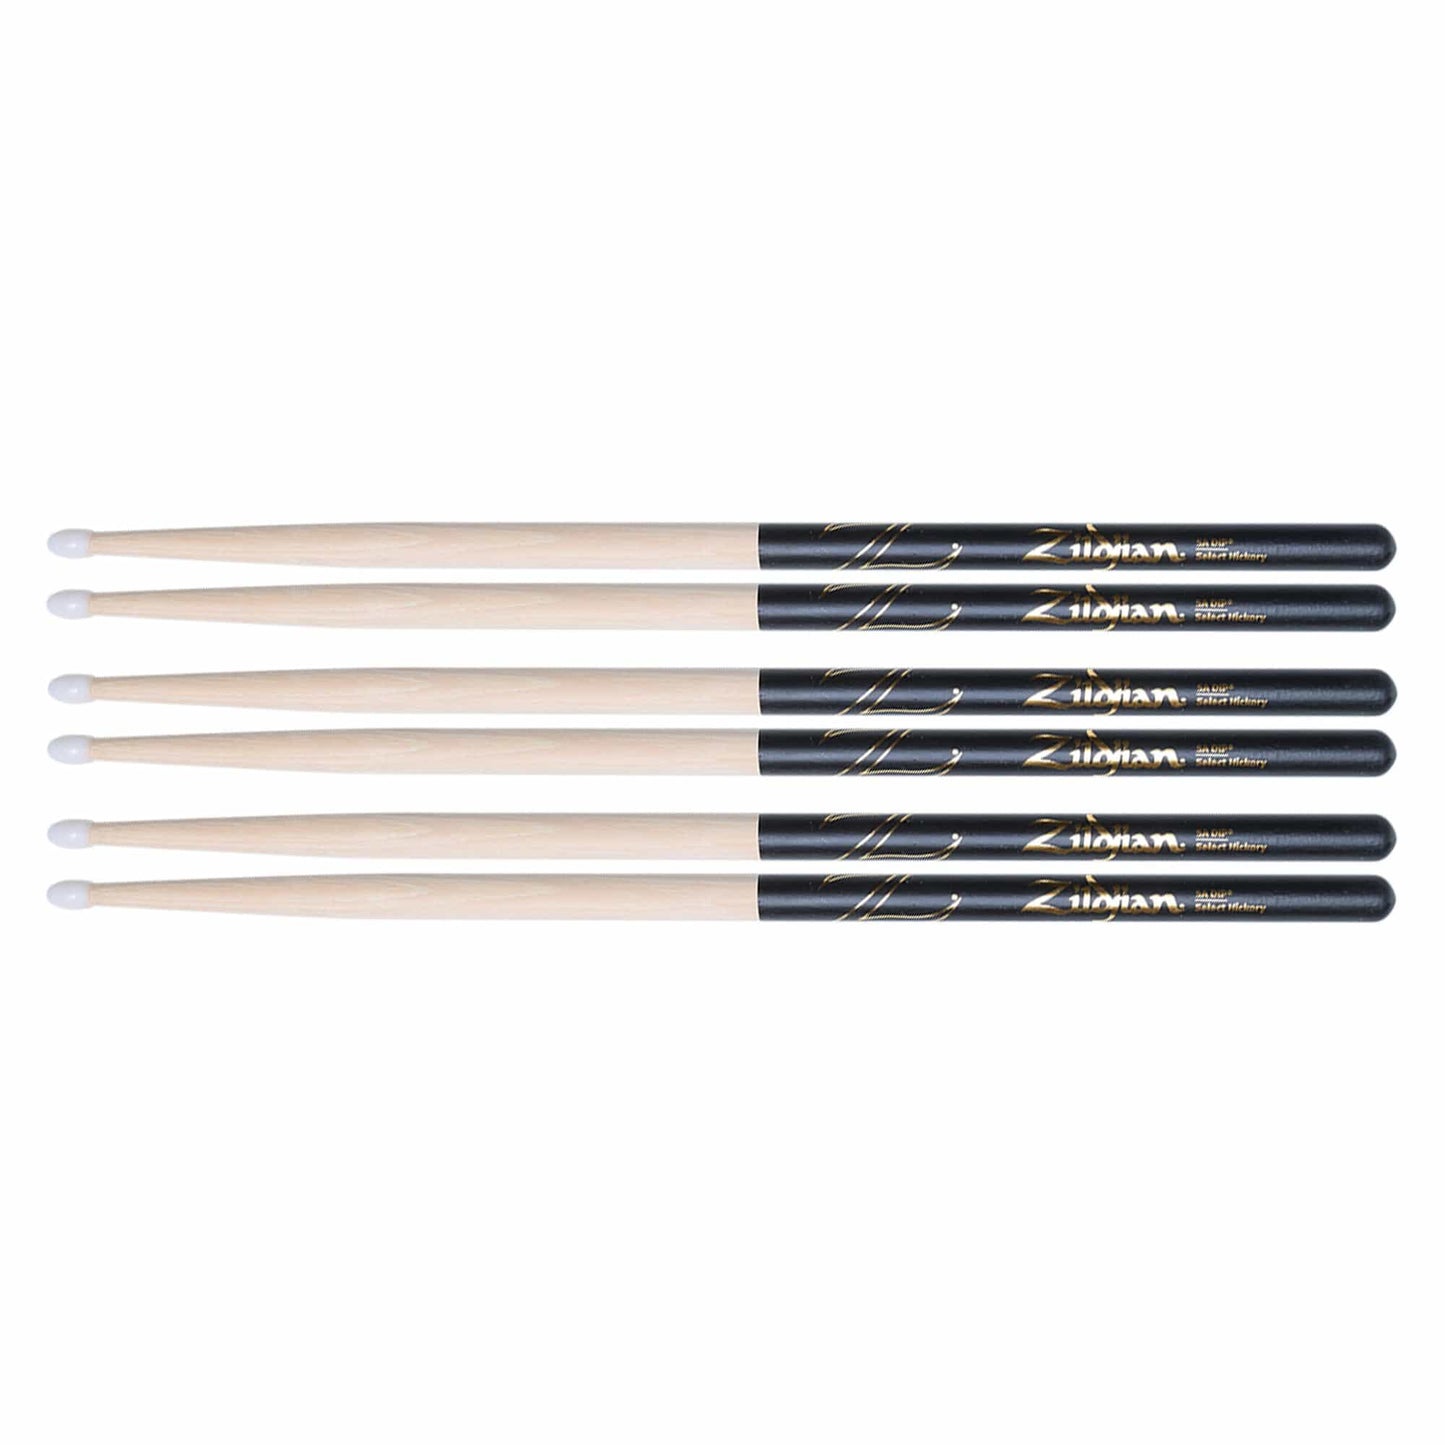 Zildjian 5A Nylon Dip Drum Sticks (3 Pair Bundle) Drums and Percussion / Parts and Accessories / Drum Sticks and Mallets